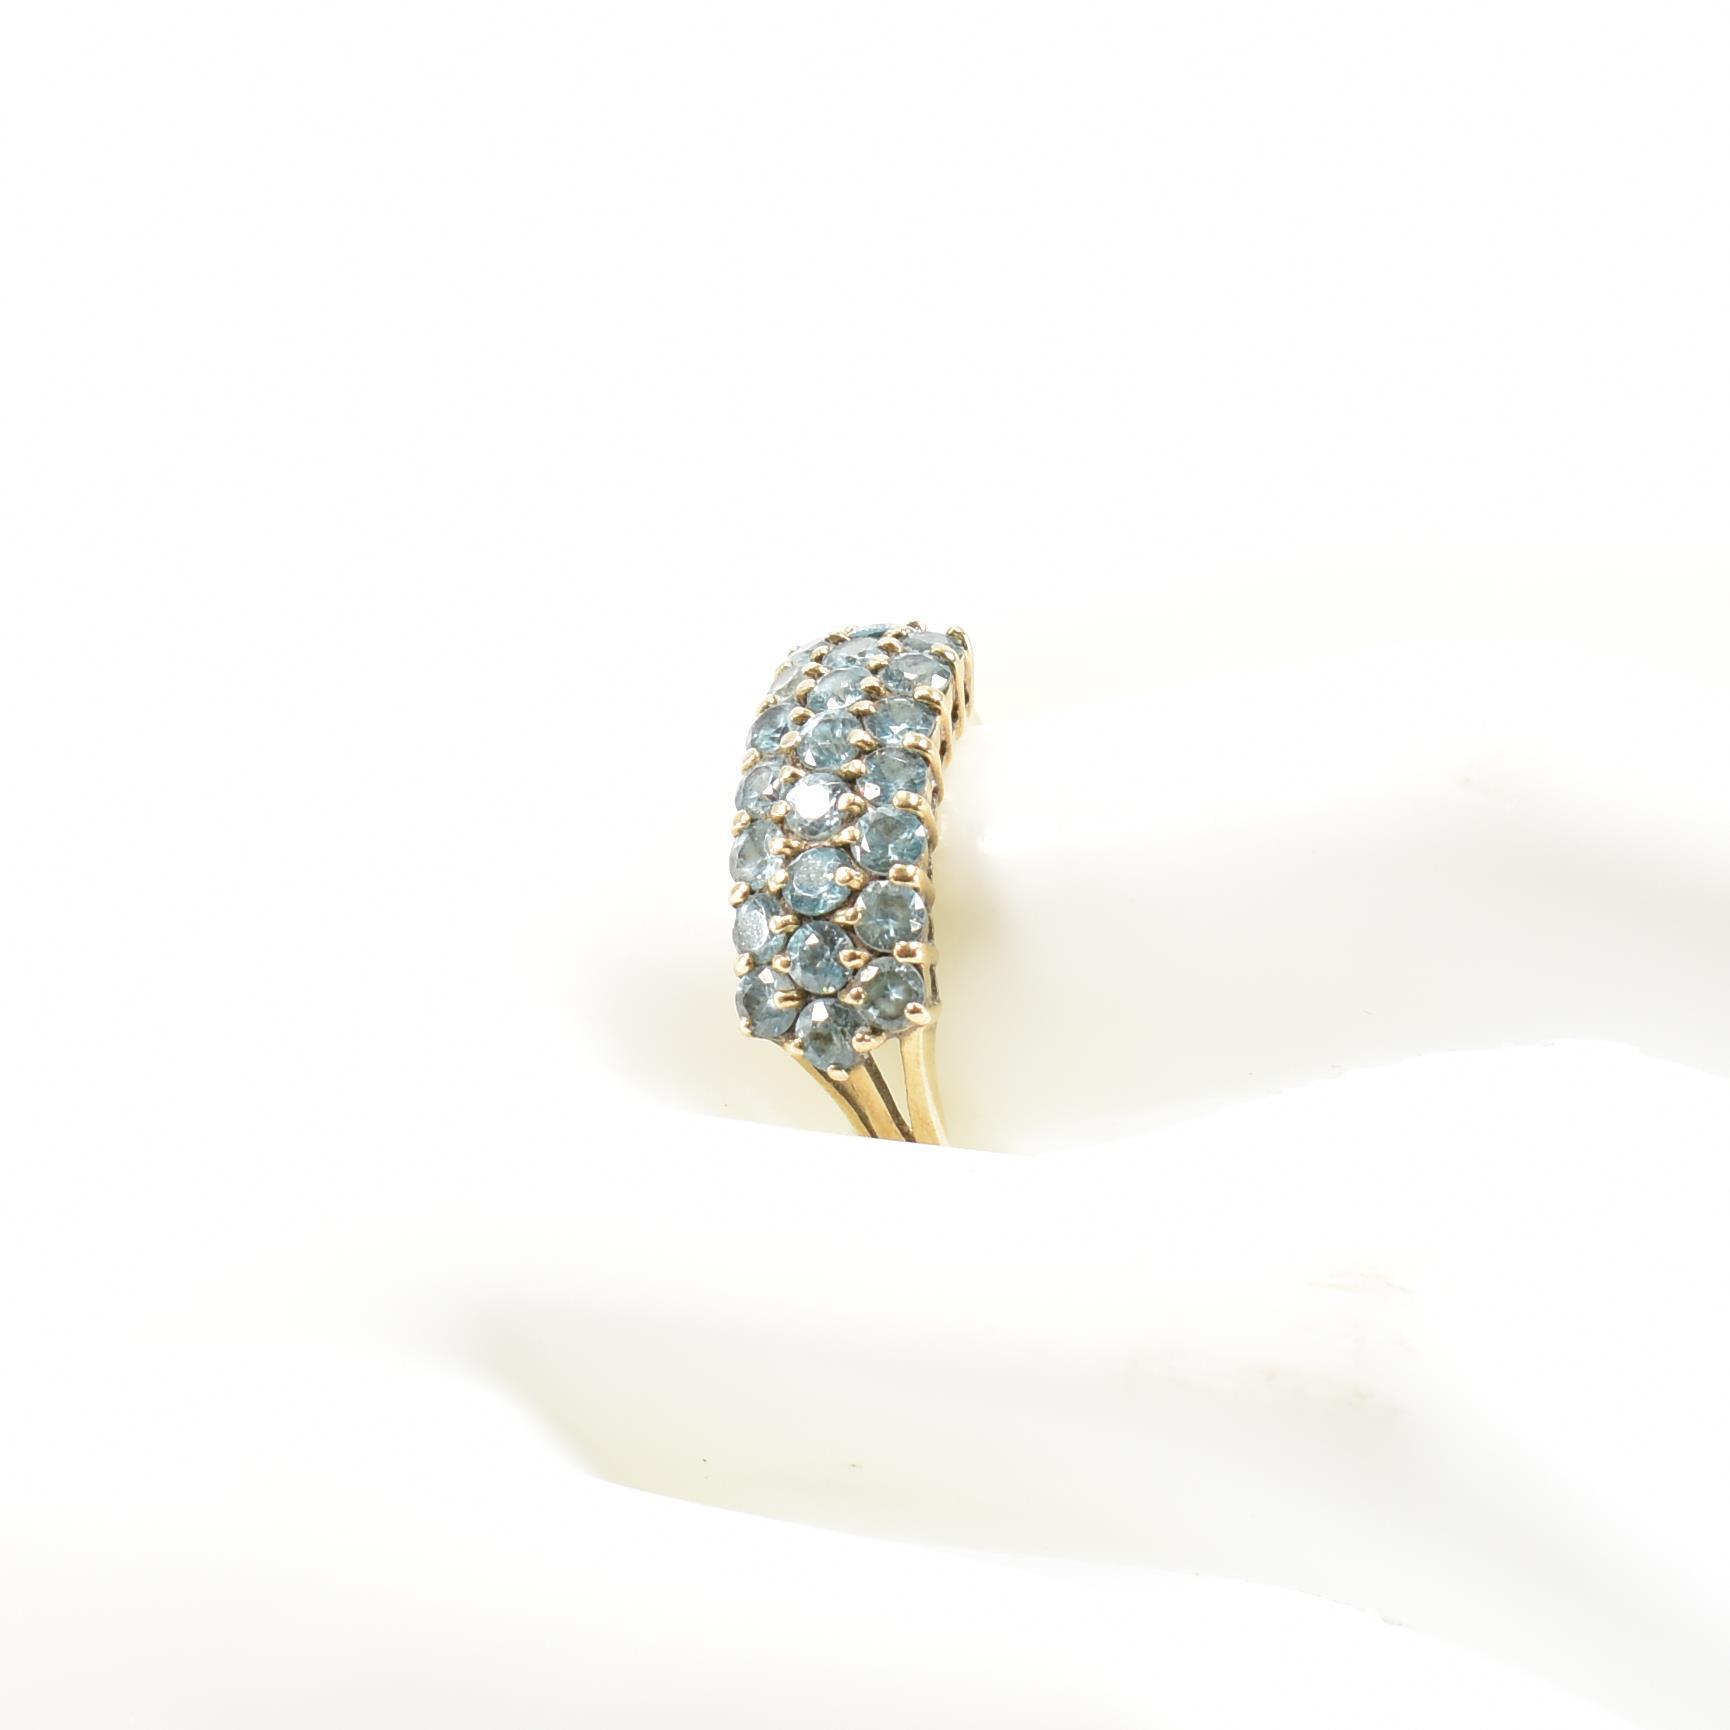 HALLMARKED 9CT GOLD & BLUE STONE CLUSTER RING - Image 8 of 8